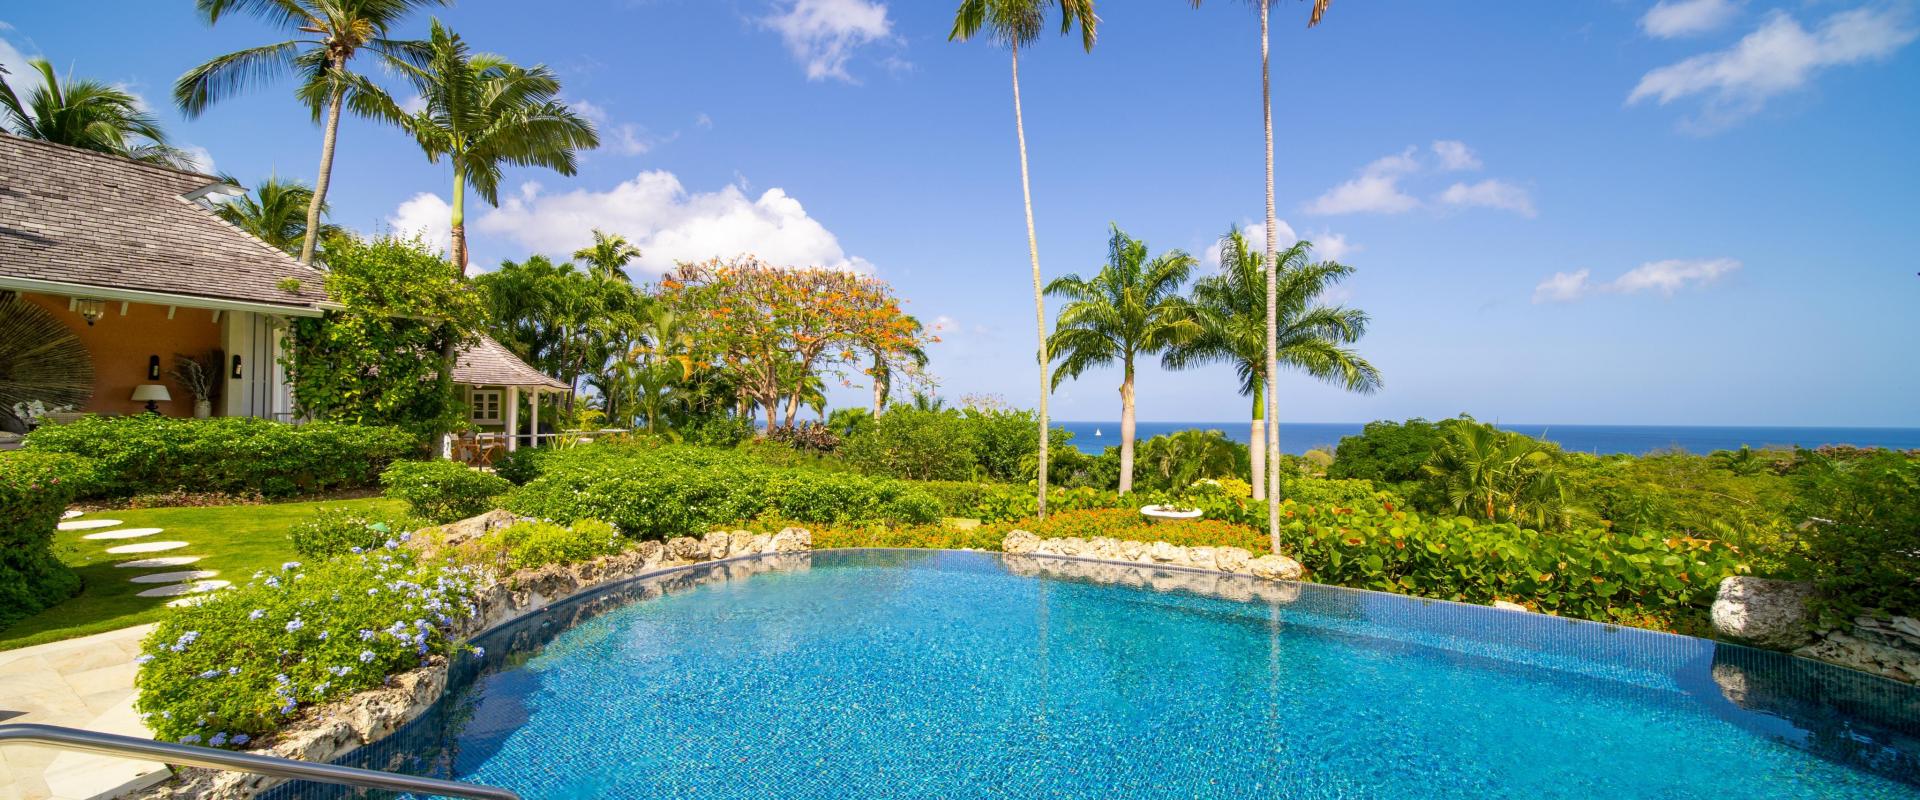 Point of View Holiday Rental In Sandy Lane Barbados Southern Pool with Garden and Ocean Views